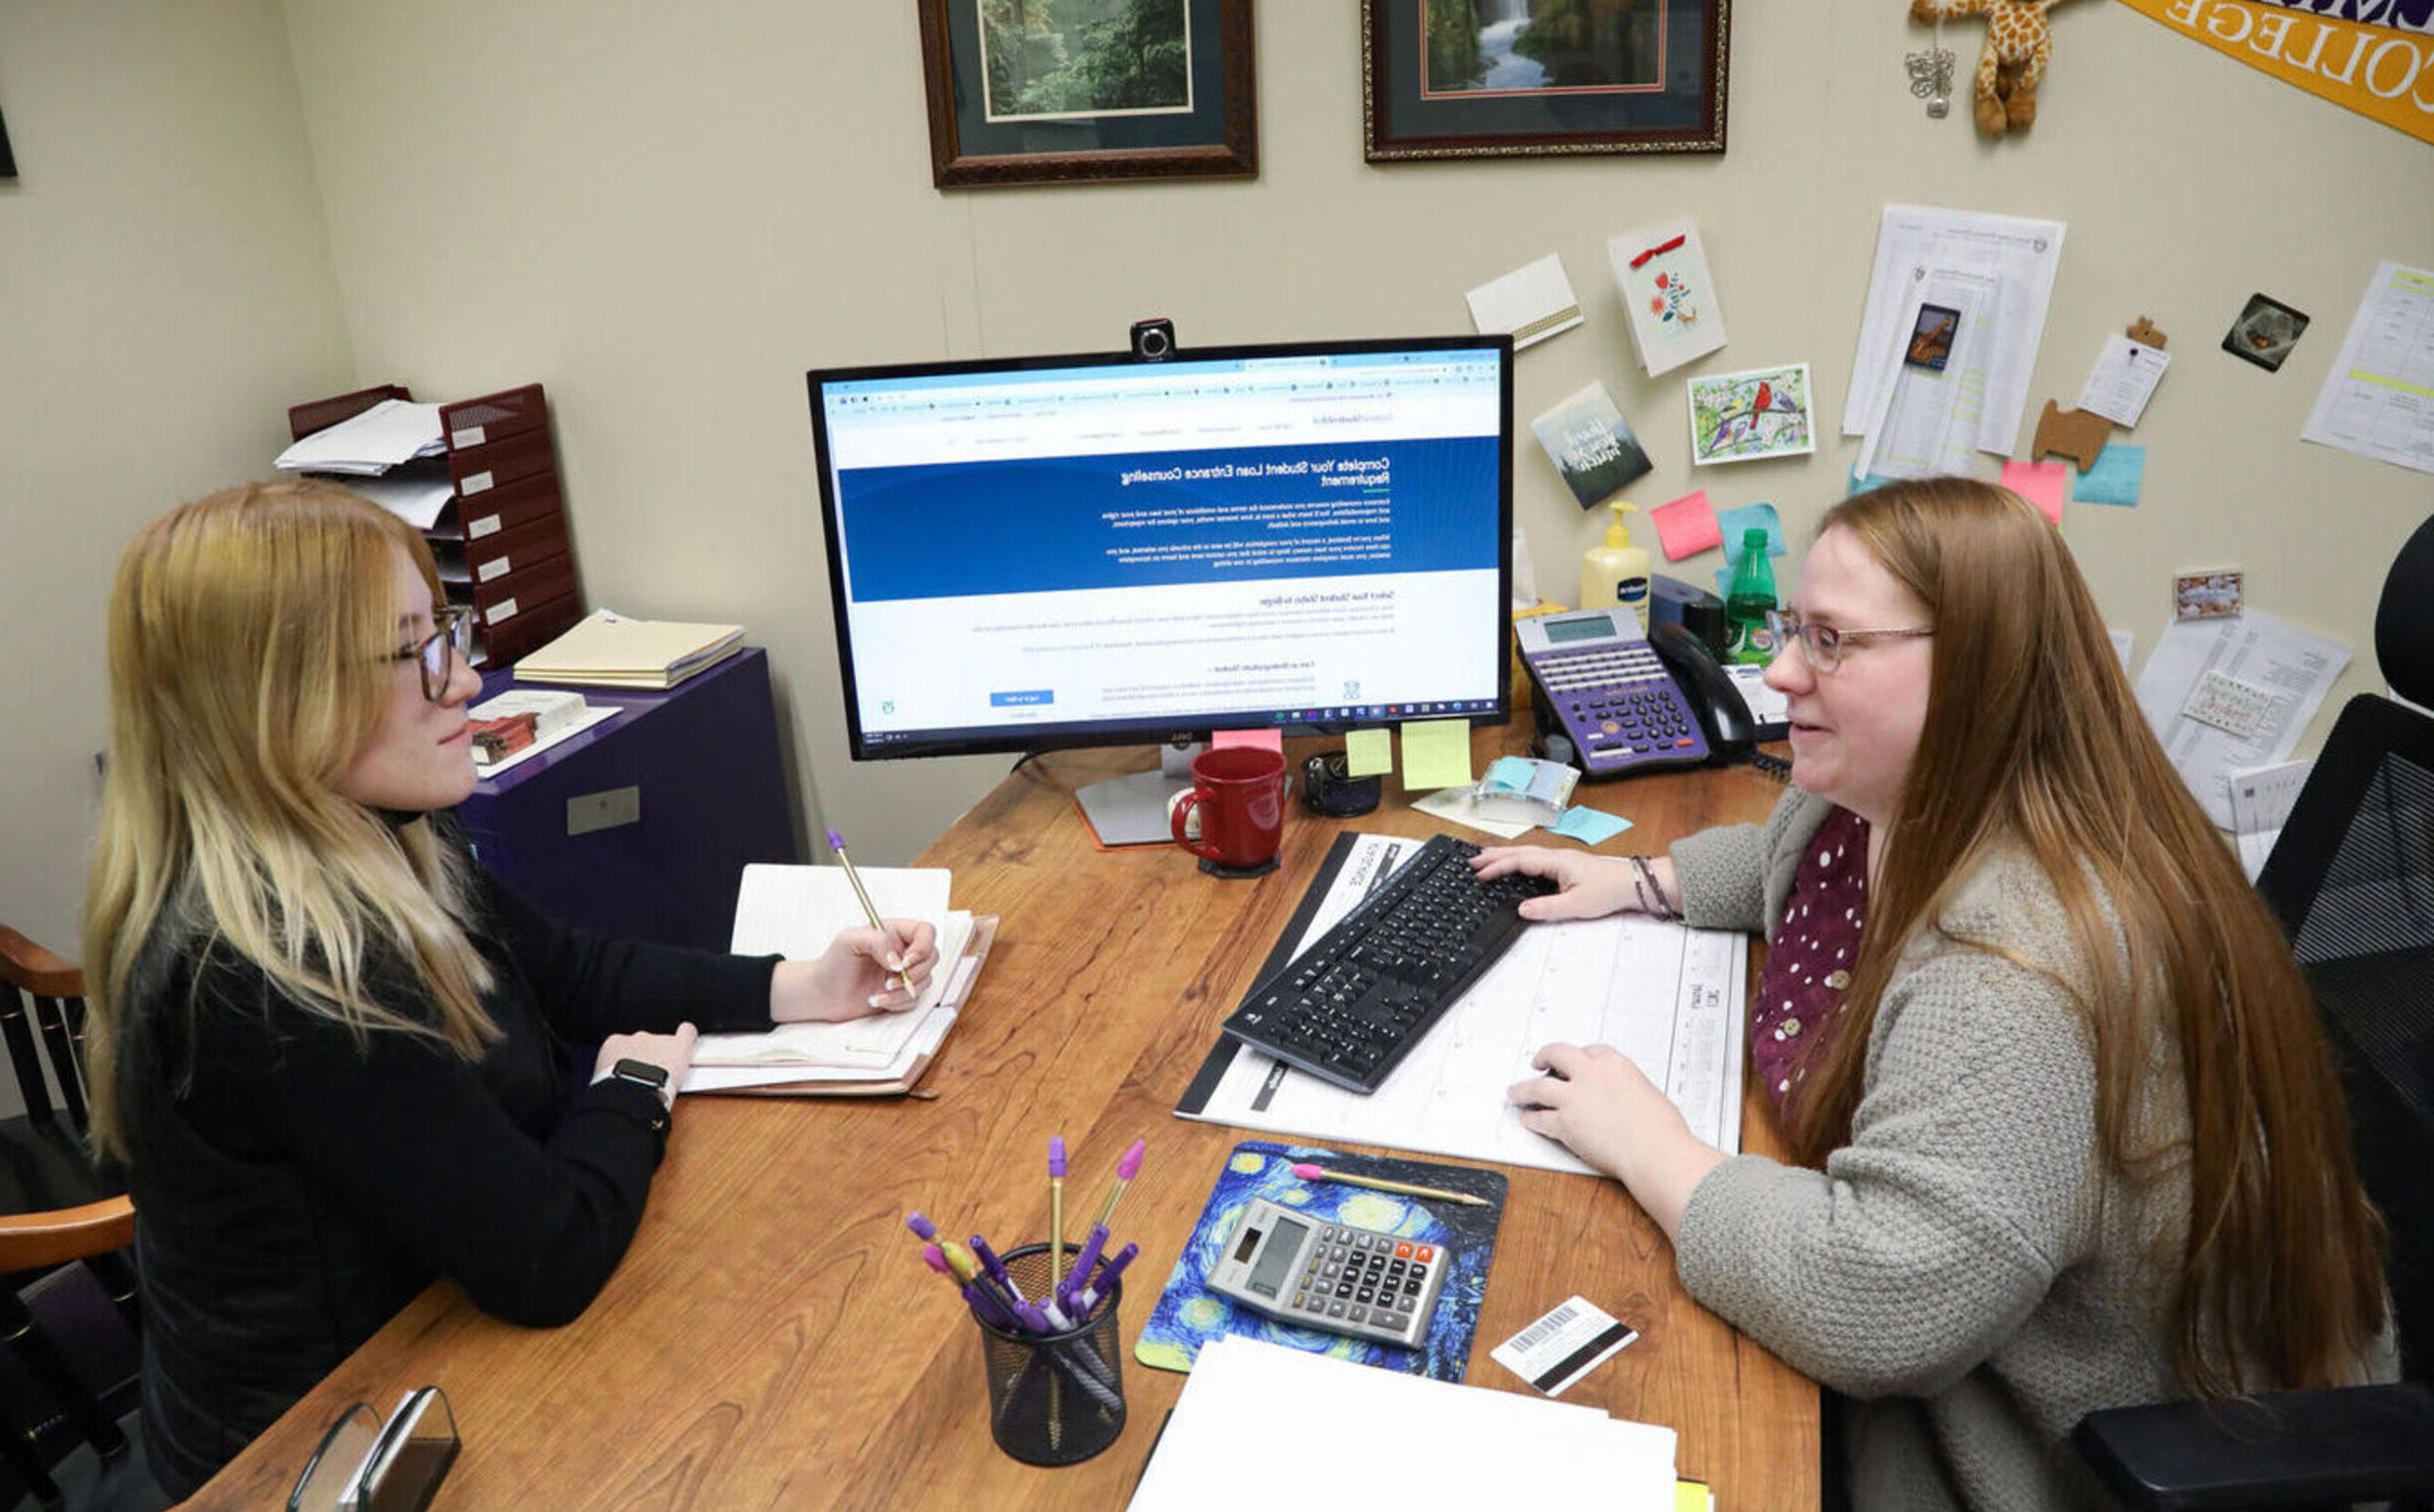 A financial aid worker meets with a student in her office